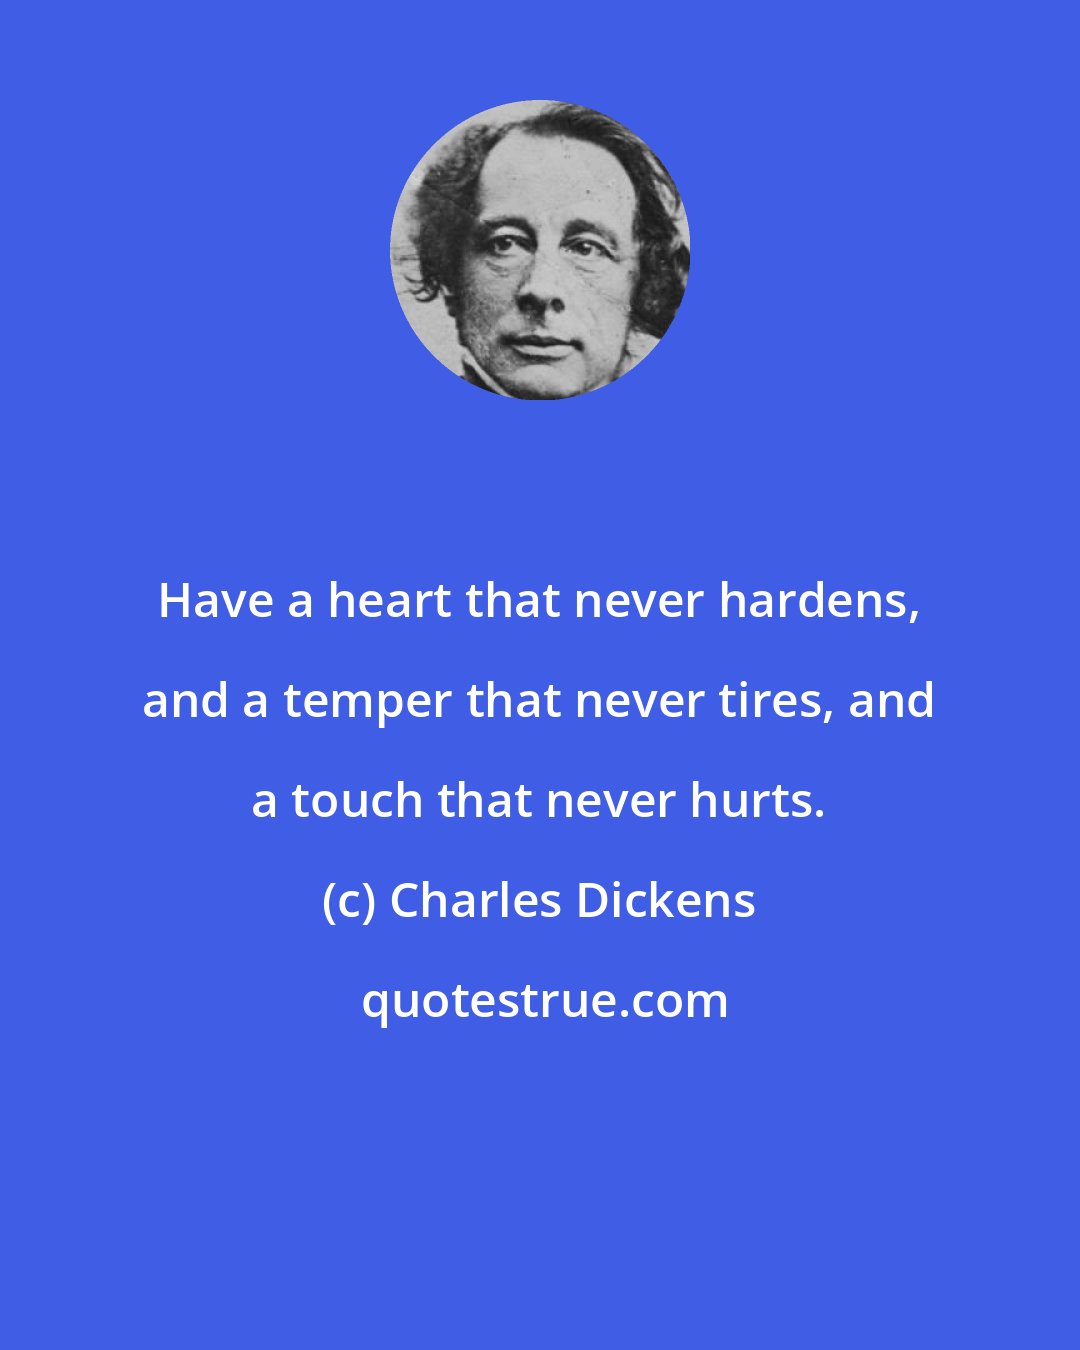 Charles Dickens: Have a heart that never hardens, and a temper that never tires, and a touch that never hurts.